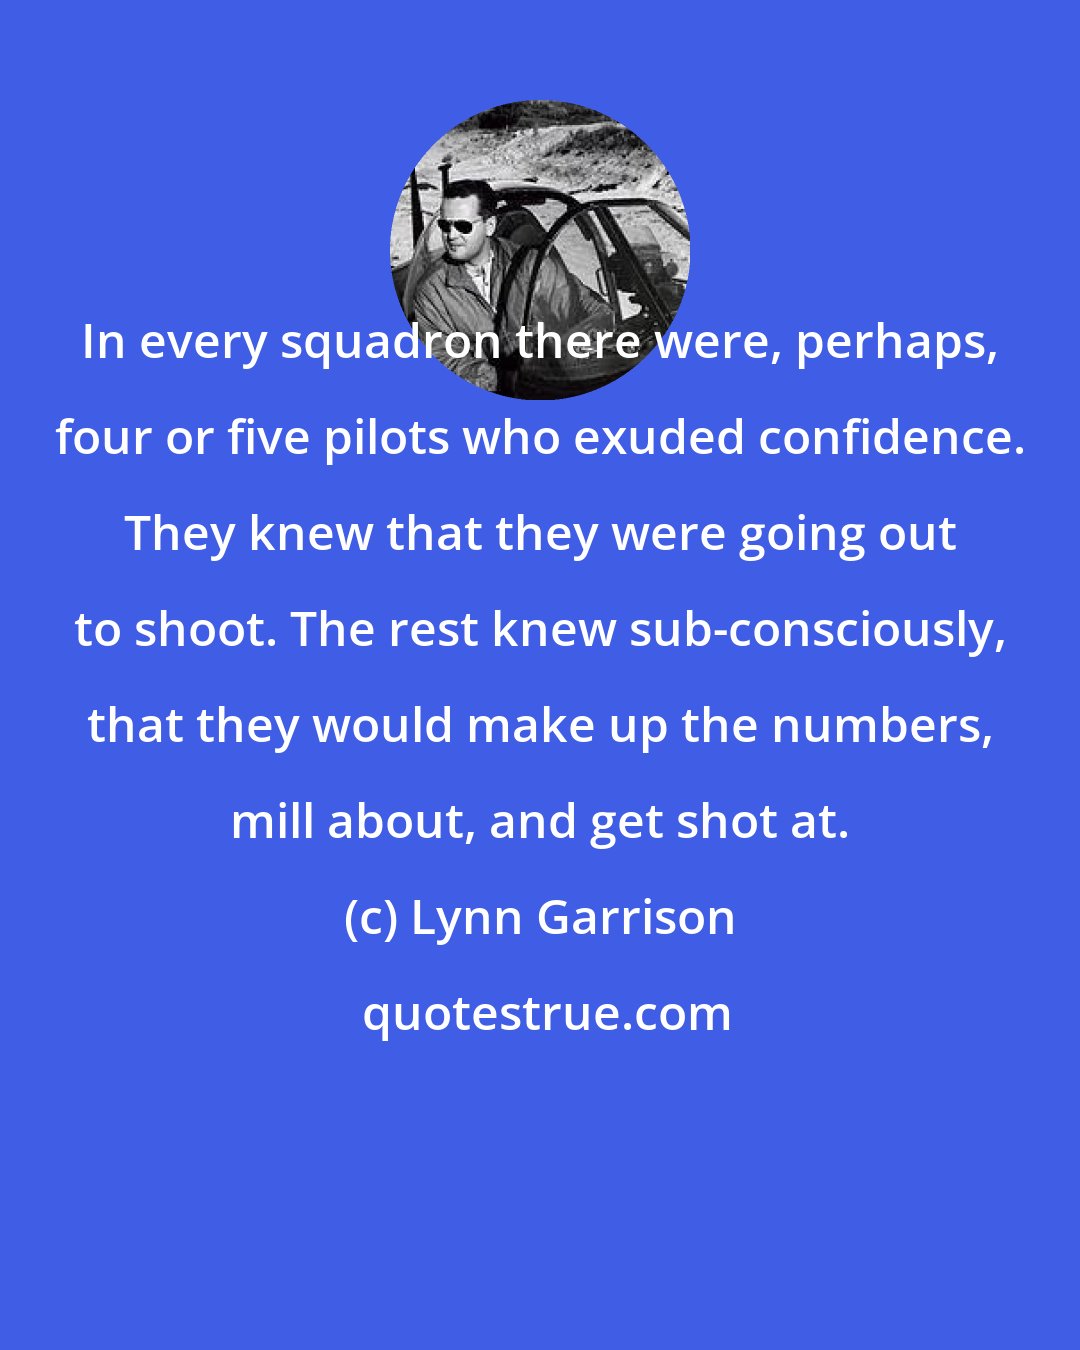 Lynn Garrison: In every squadron there were, perhaps, four or five pilots who exuded confidence. They knew that they were going out to shoot. The rest knew sub-consciously, that they would make up the numbers, mill about, and get shot at.